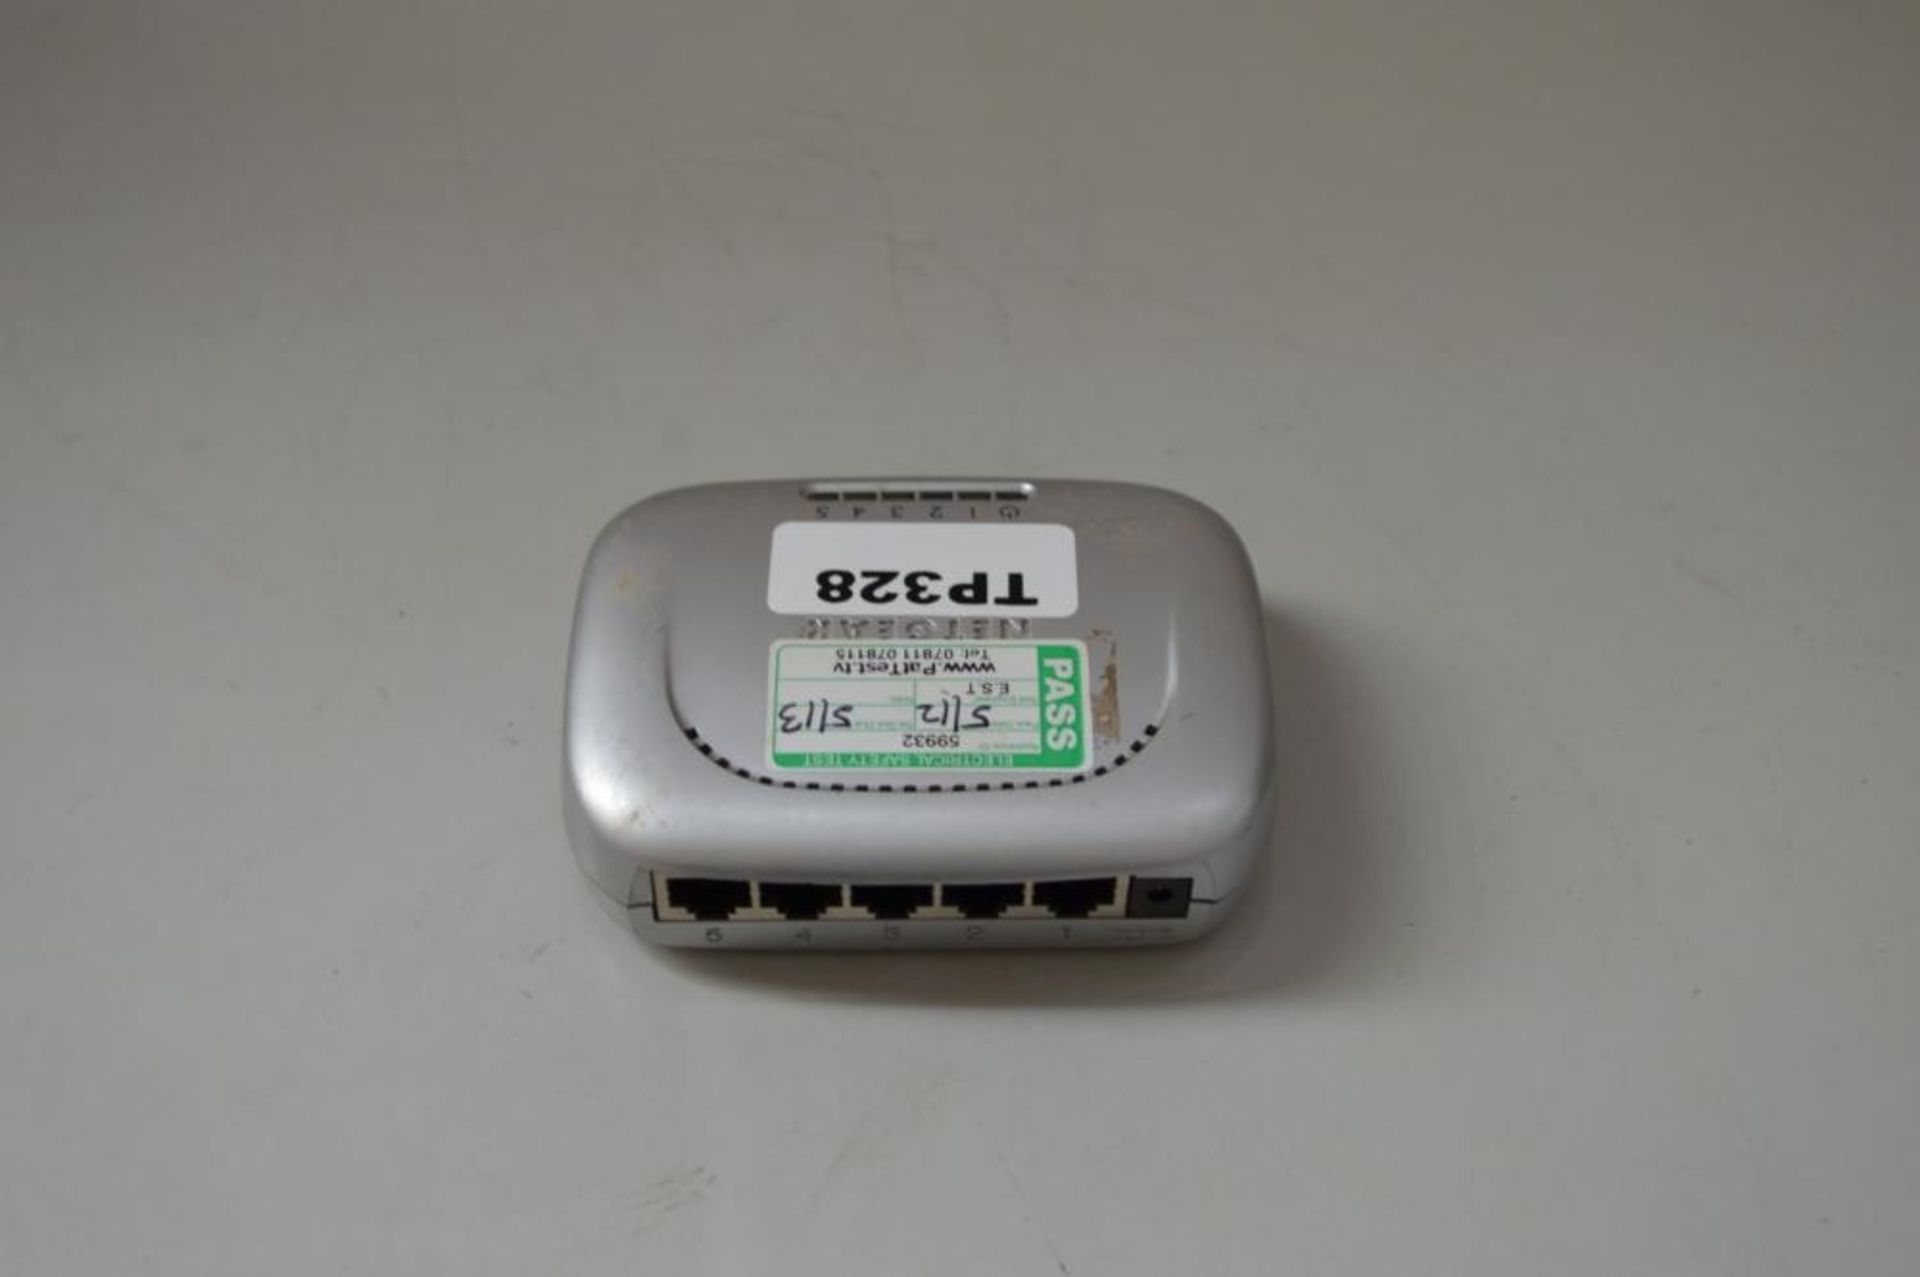 1 x Netgear Switch FS605 - Ref TP328 - CL394 - Location: Altrincham WA14 - HKPal4 As per our - Image 3 of 3